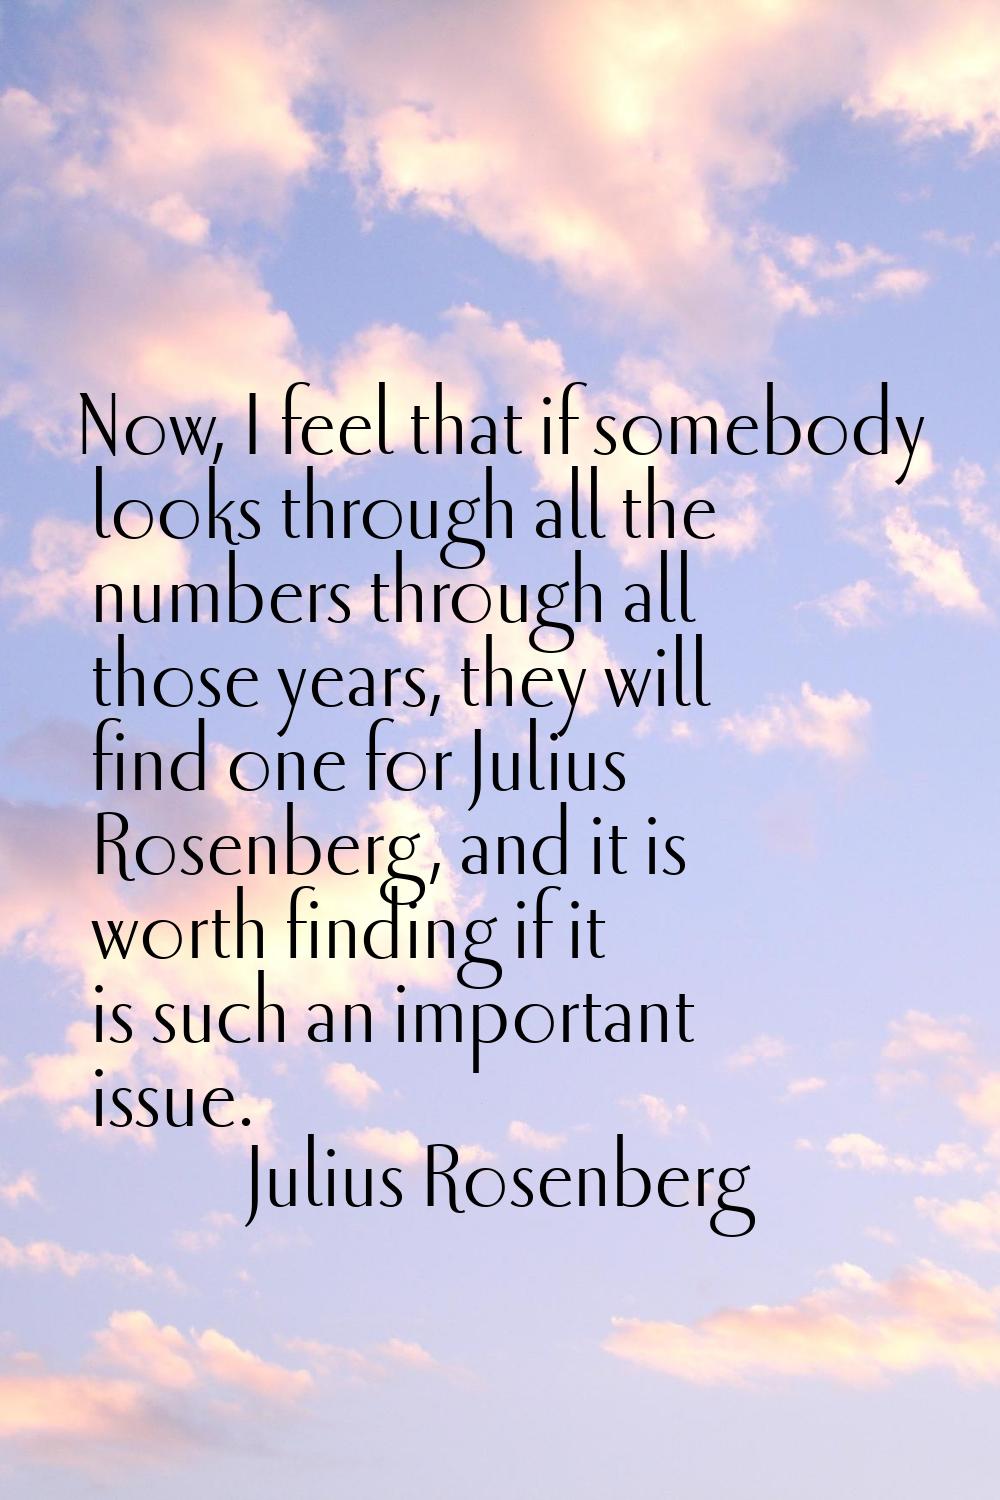 Now, I feel that if somebody looks through all the numbers through all those years, they will find 